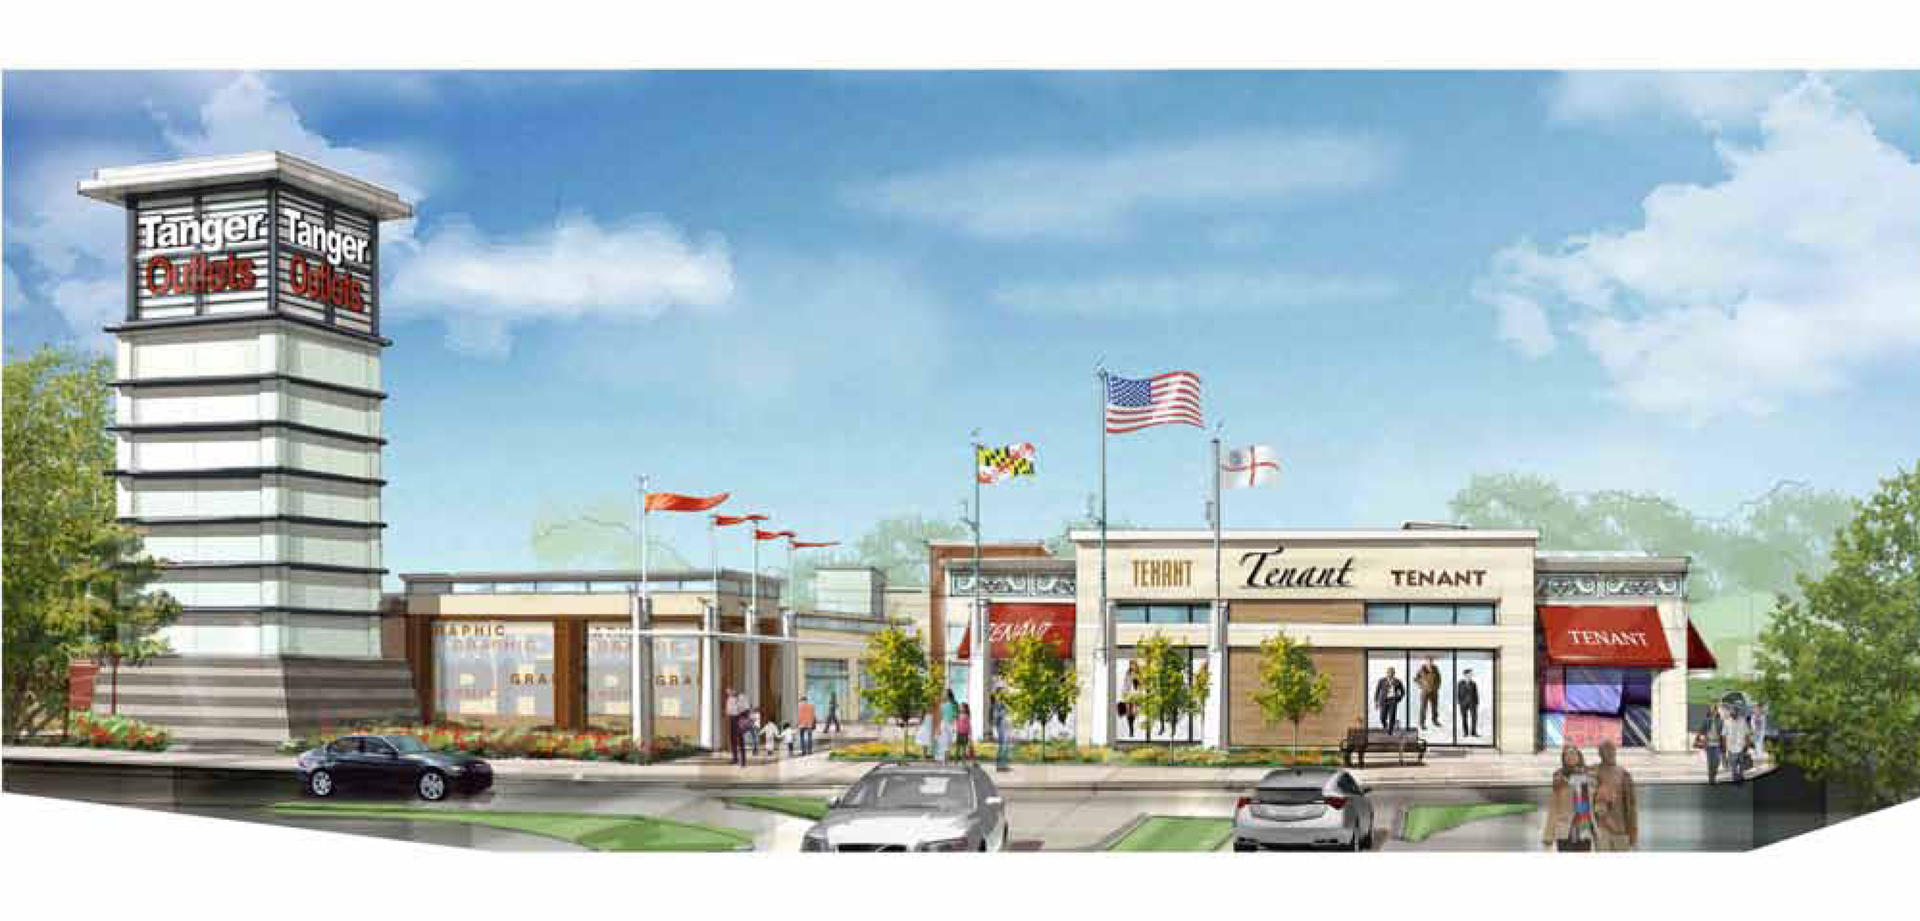 An artists rendering of the new Tanger Outlets National Harbor. (Photo: Tanger Outlets)